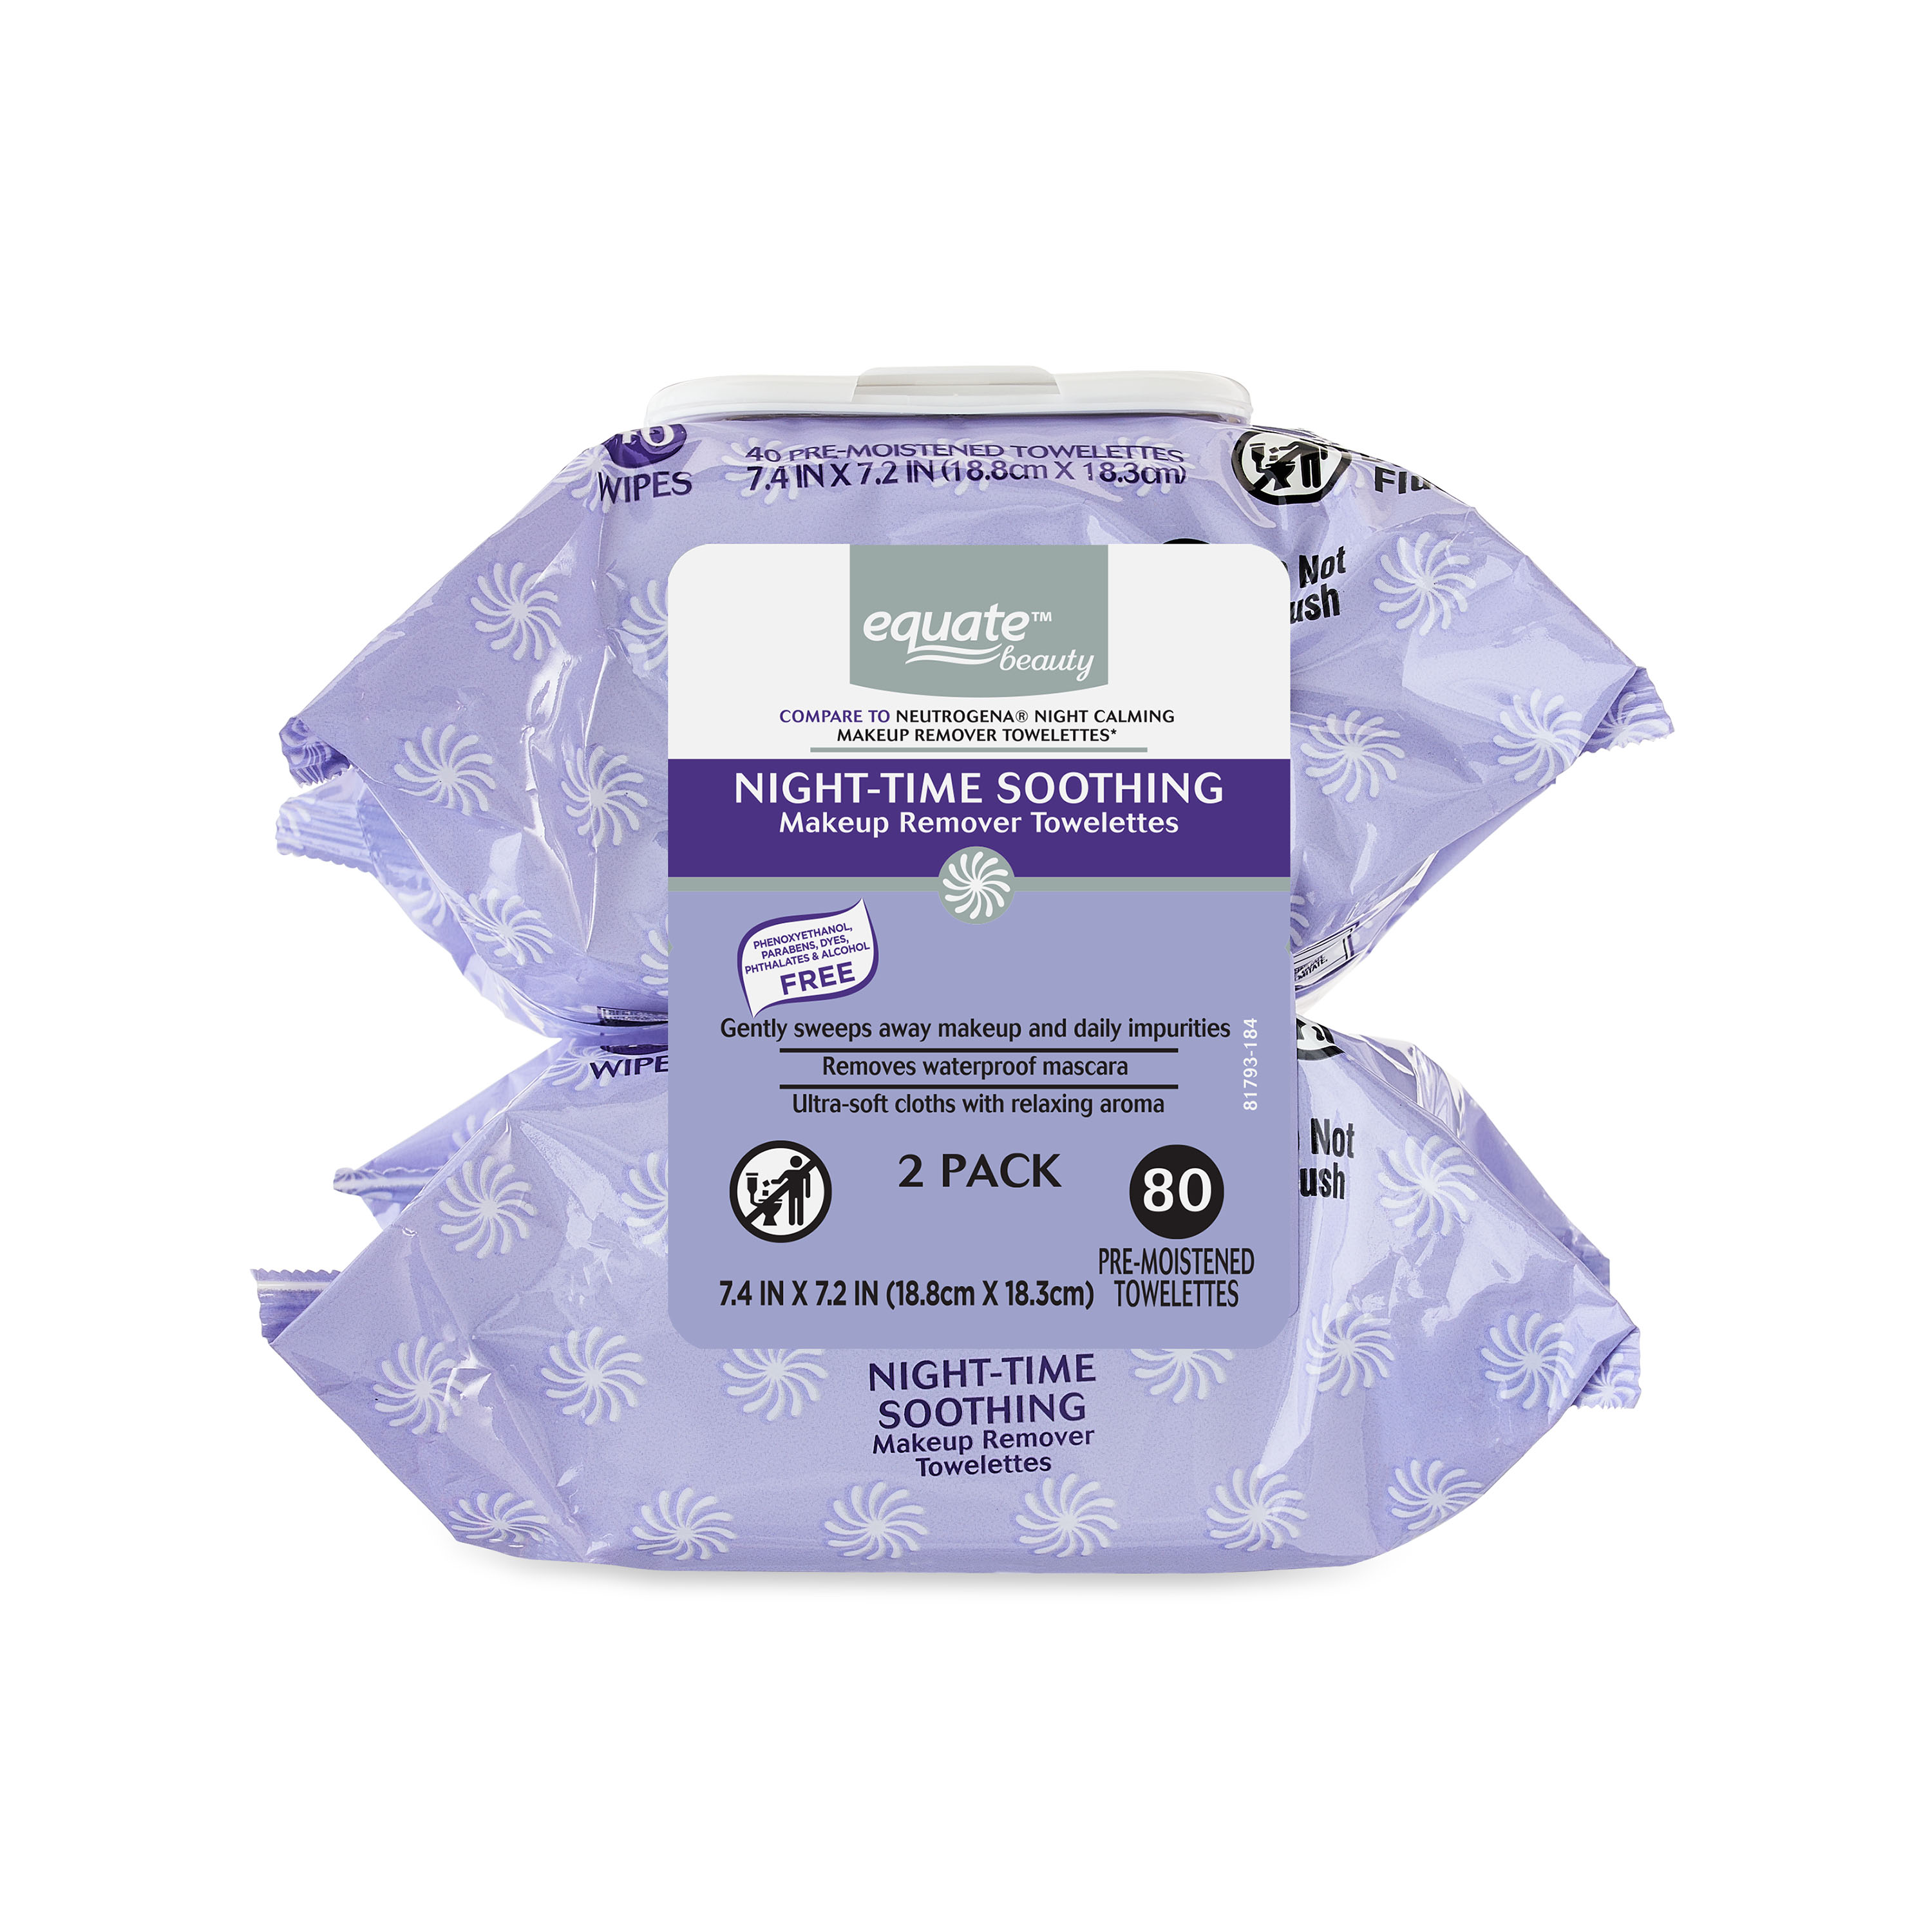 Equate Beauty Night-Time Soothing Makeup Remover Wipes, 40 Count, 2 Pack - image 1 of 7